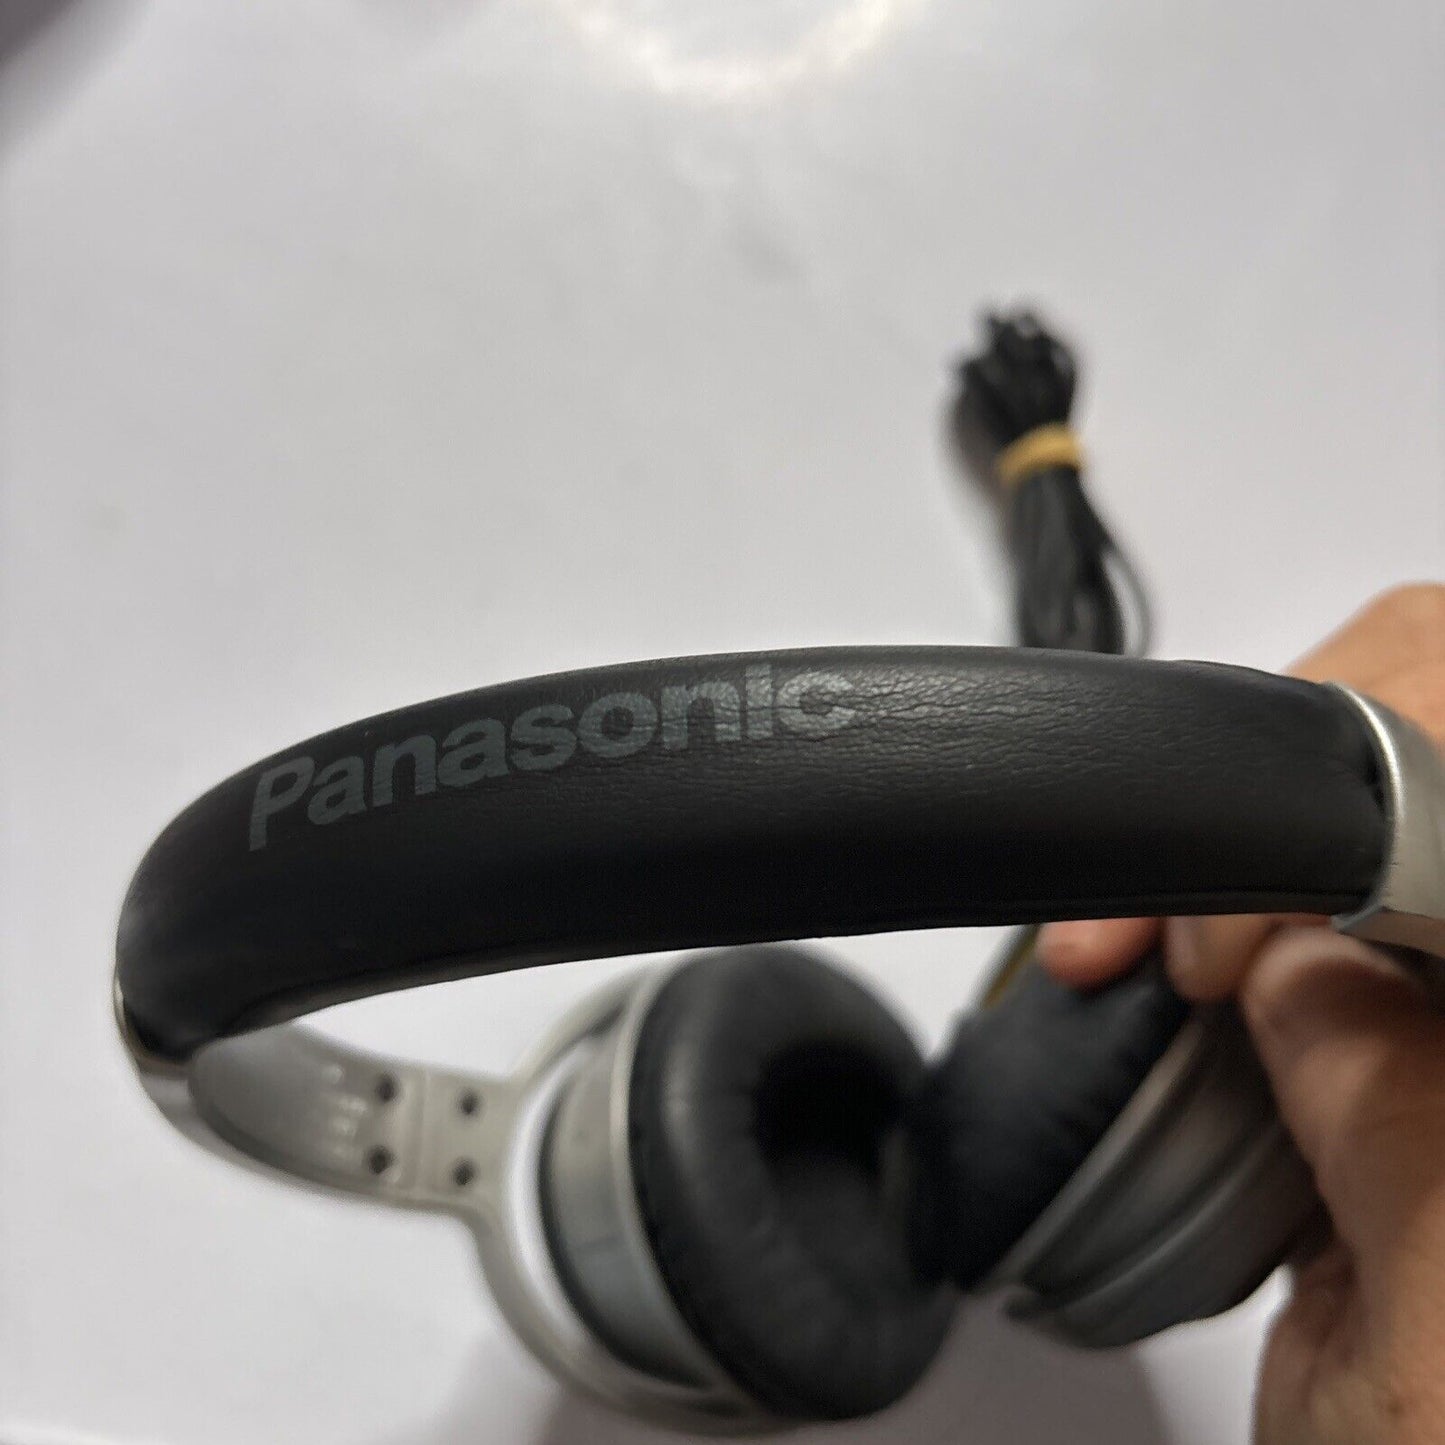 Panasonic RP-HC500 Wired Noise Cancelling Headphones 3.5mm